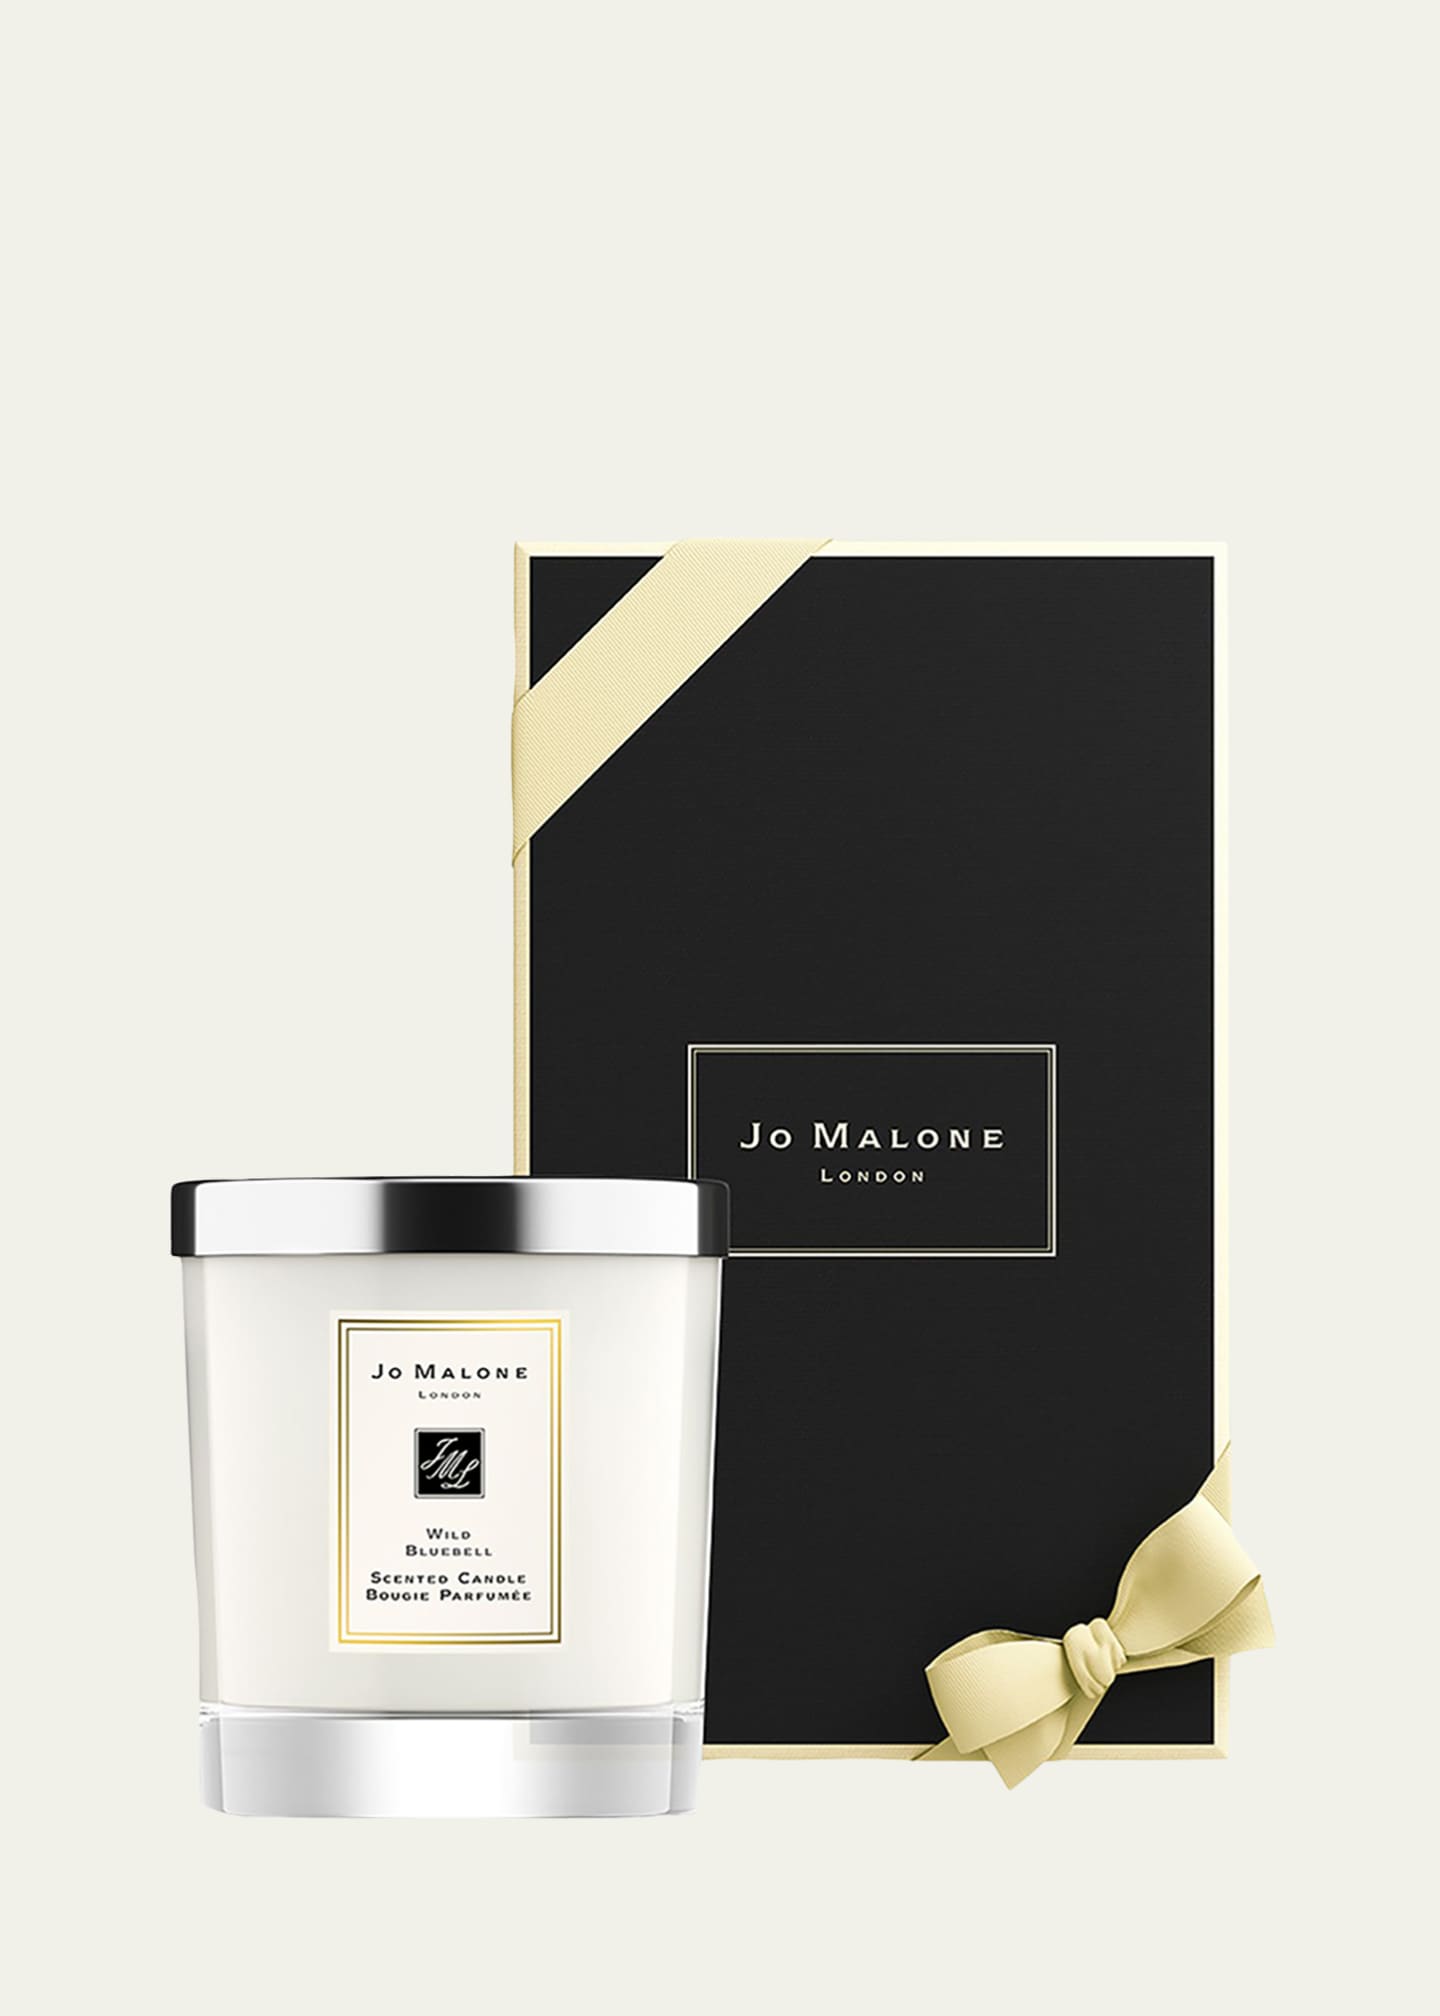 Jo Malone London Wild Bluebell Home Candle Image 1 of 4